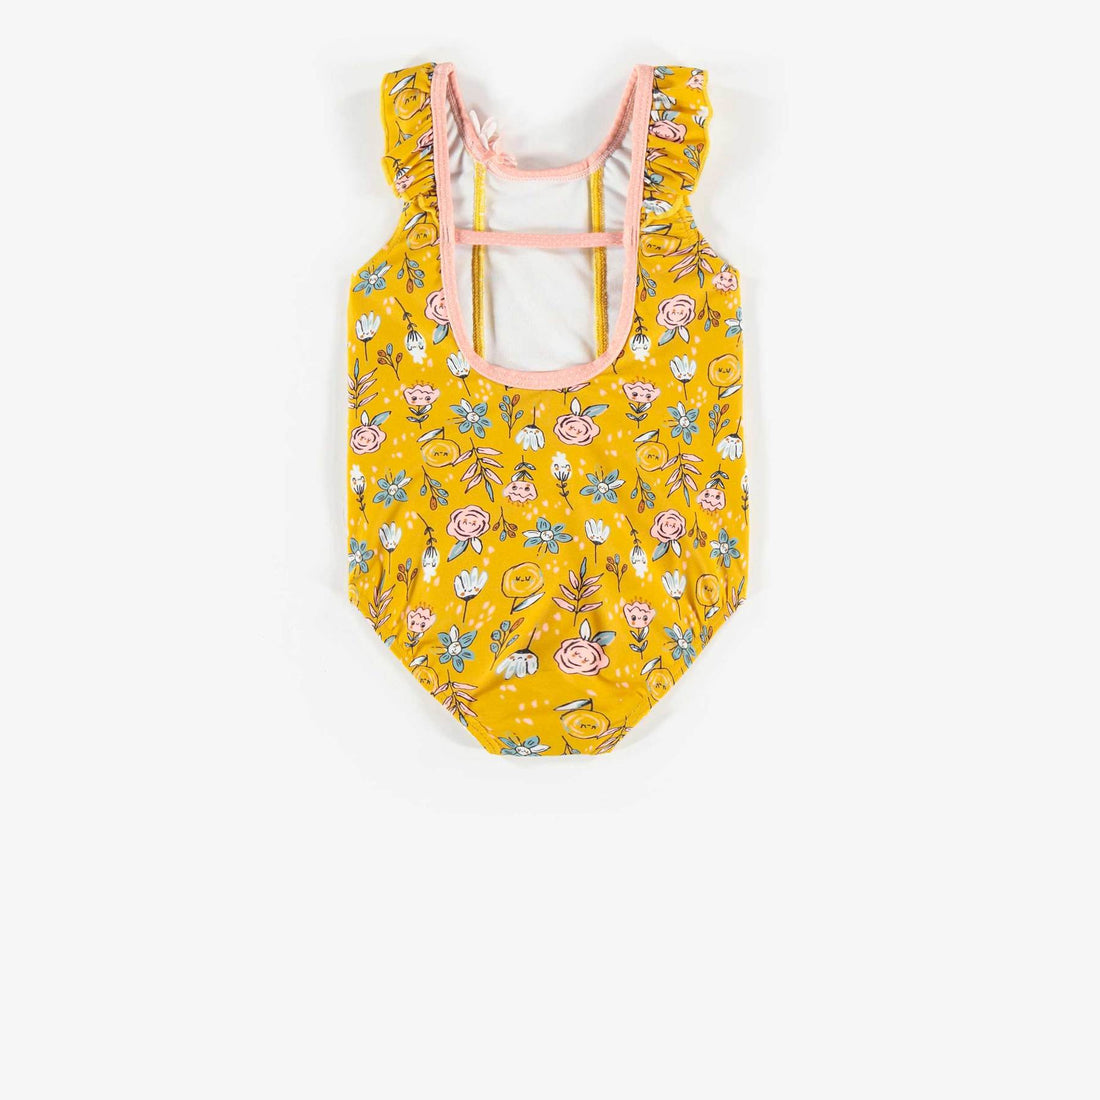 YELLOW FLORAL ONE-PIECE SWIMSUIT, BABY GIRL